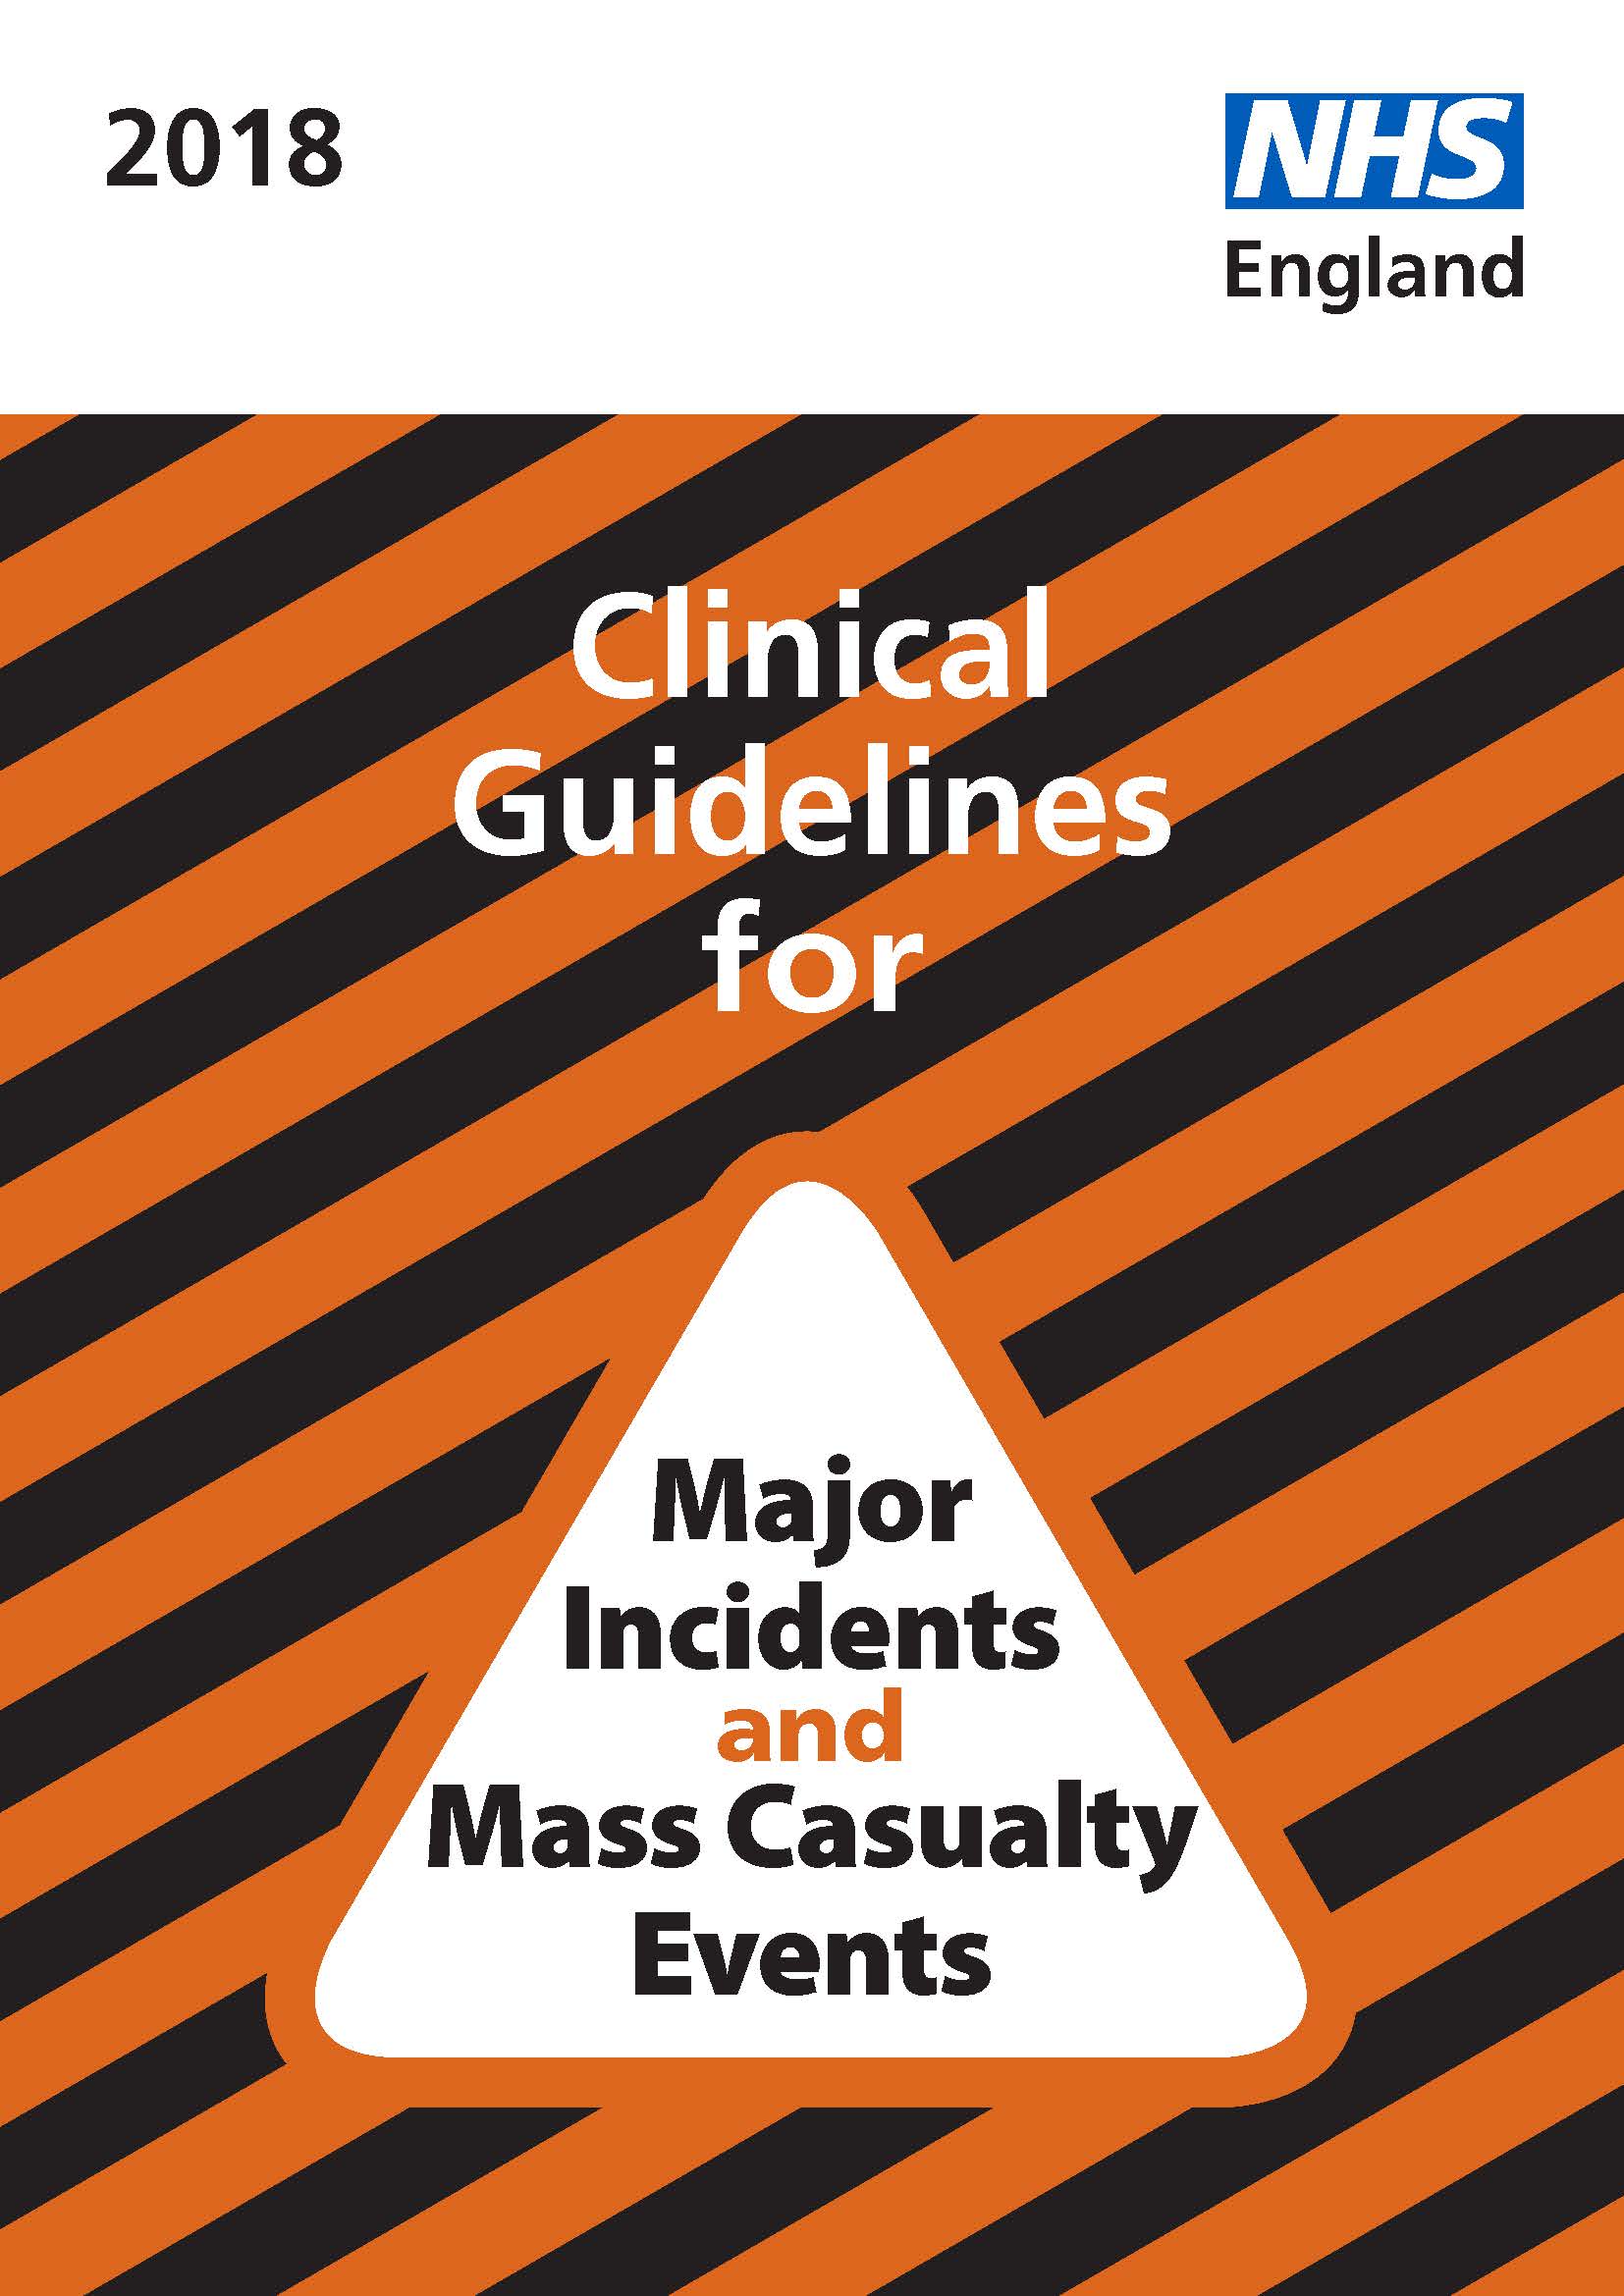 Major Incident and Mass Casualty Events 2018